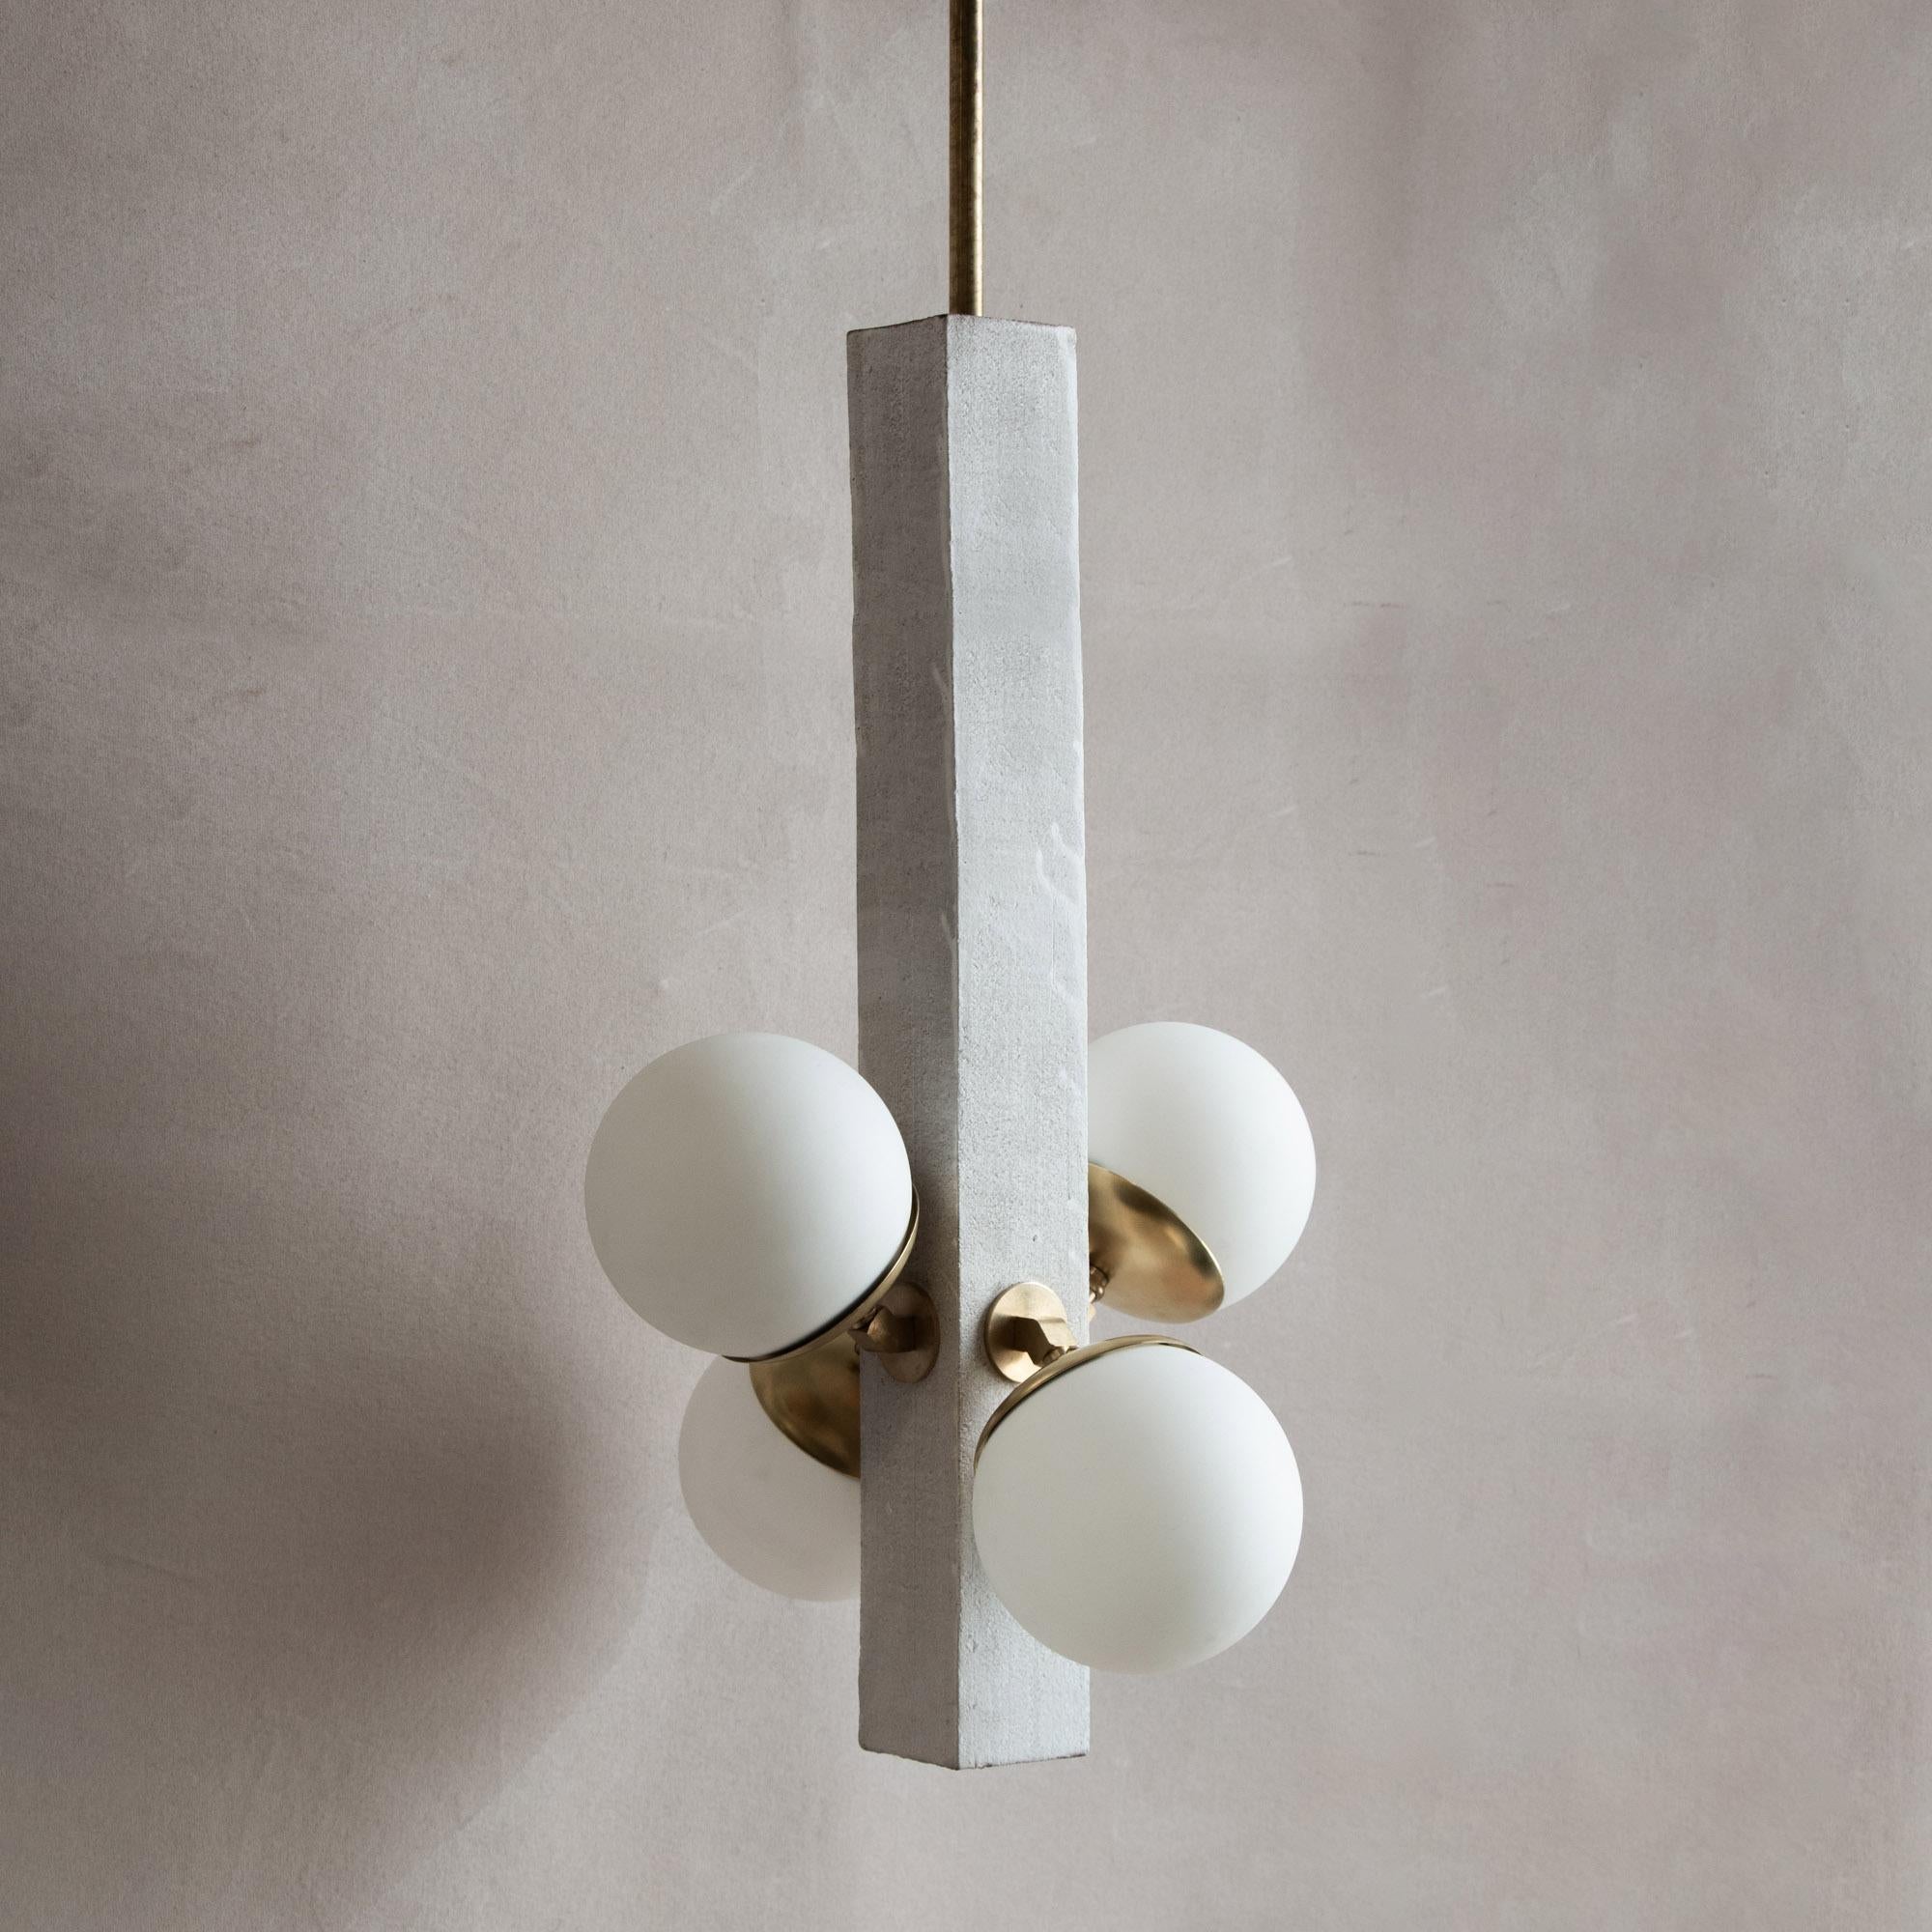 Inspired by midcentury Brutalist architecture and building materials, this playful pendant light balances a strong substantial ceramic base with delicate brass hardware and matte white glass. The substantial ceramic center column is handcrafted from